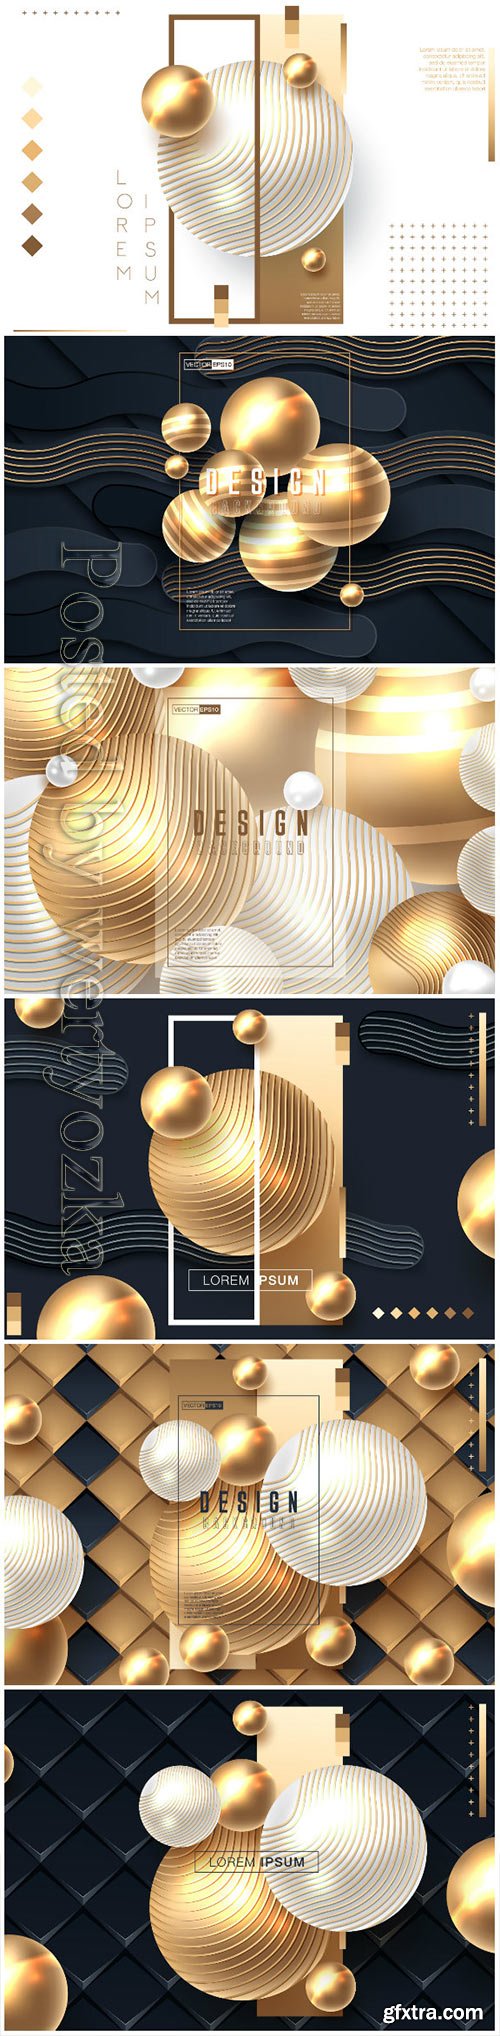 Abstract background with spheres in gold and black color